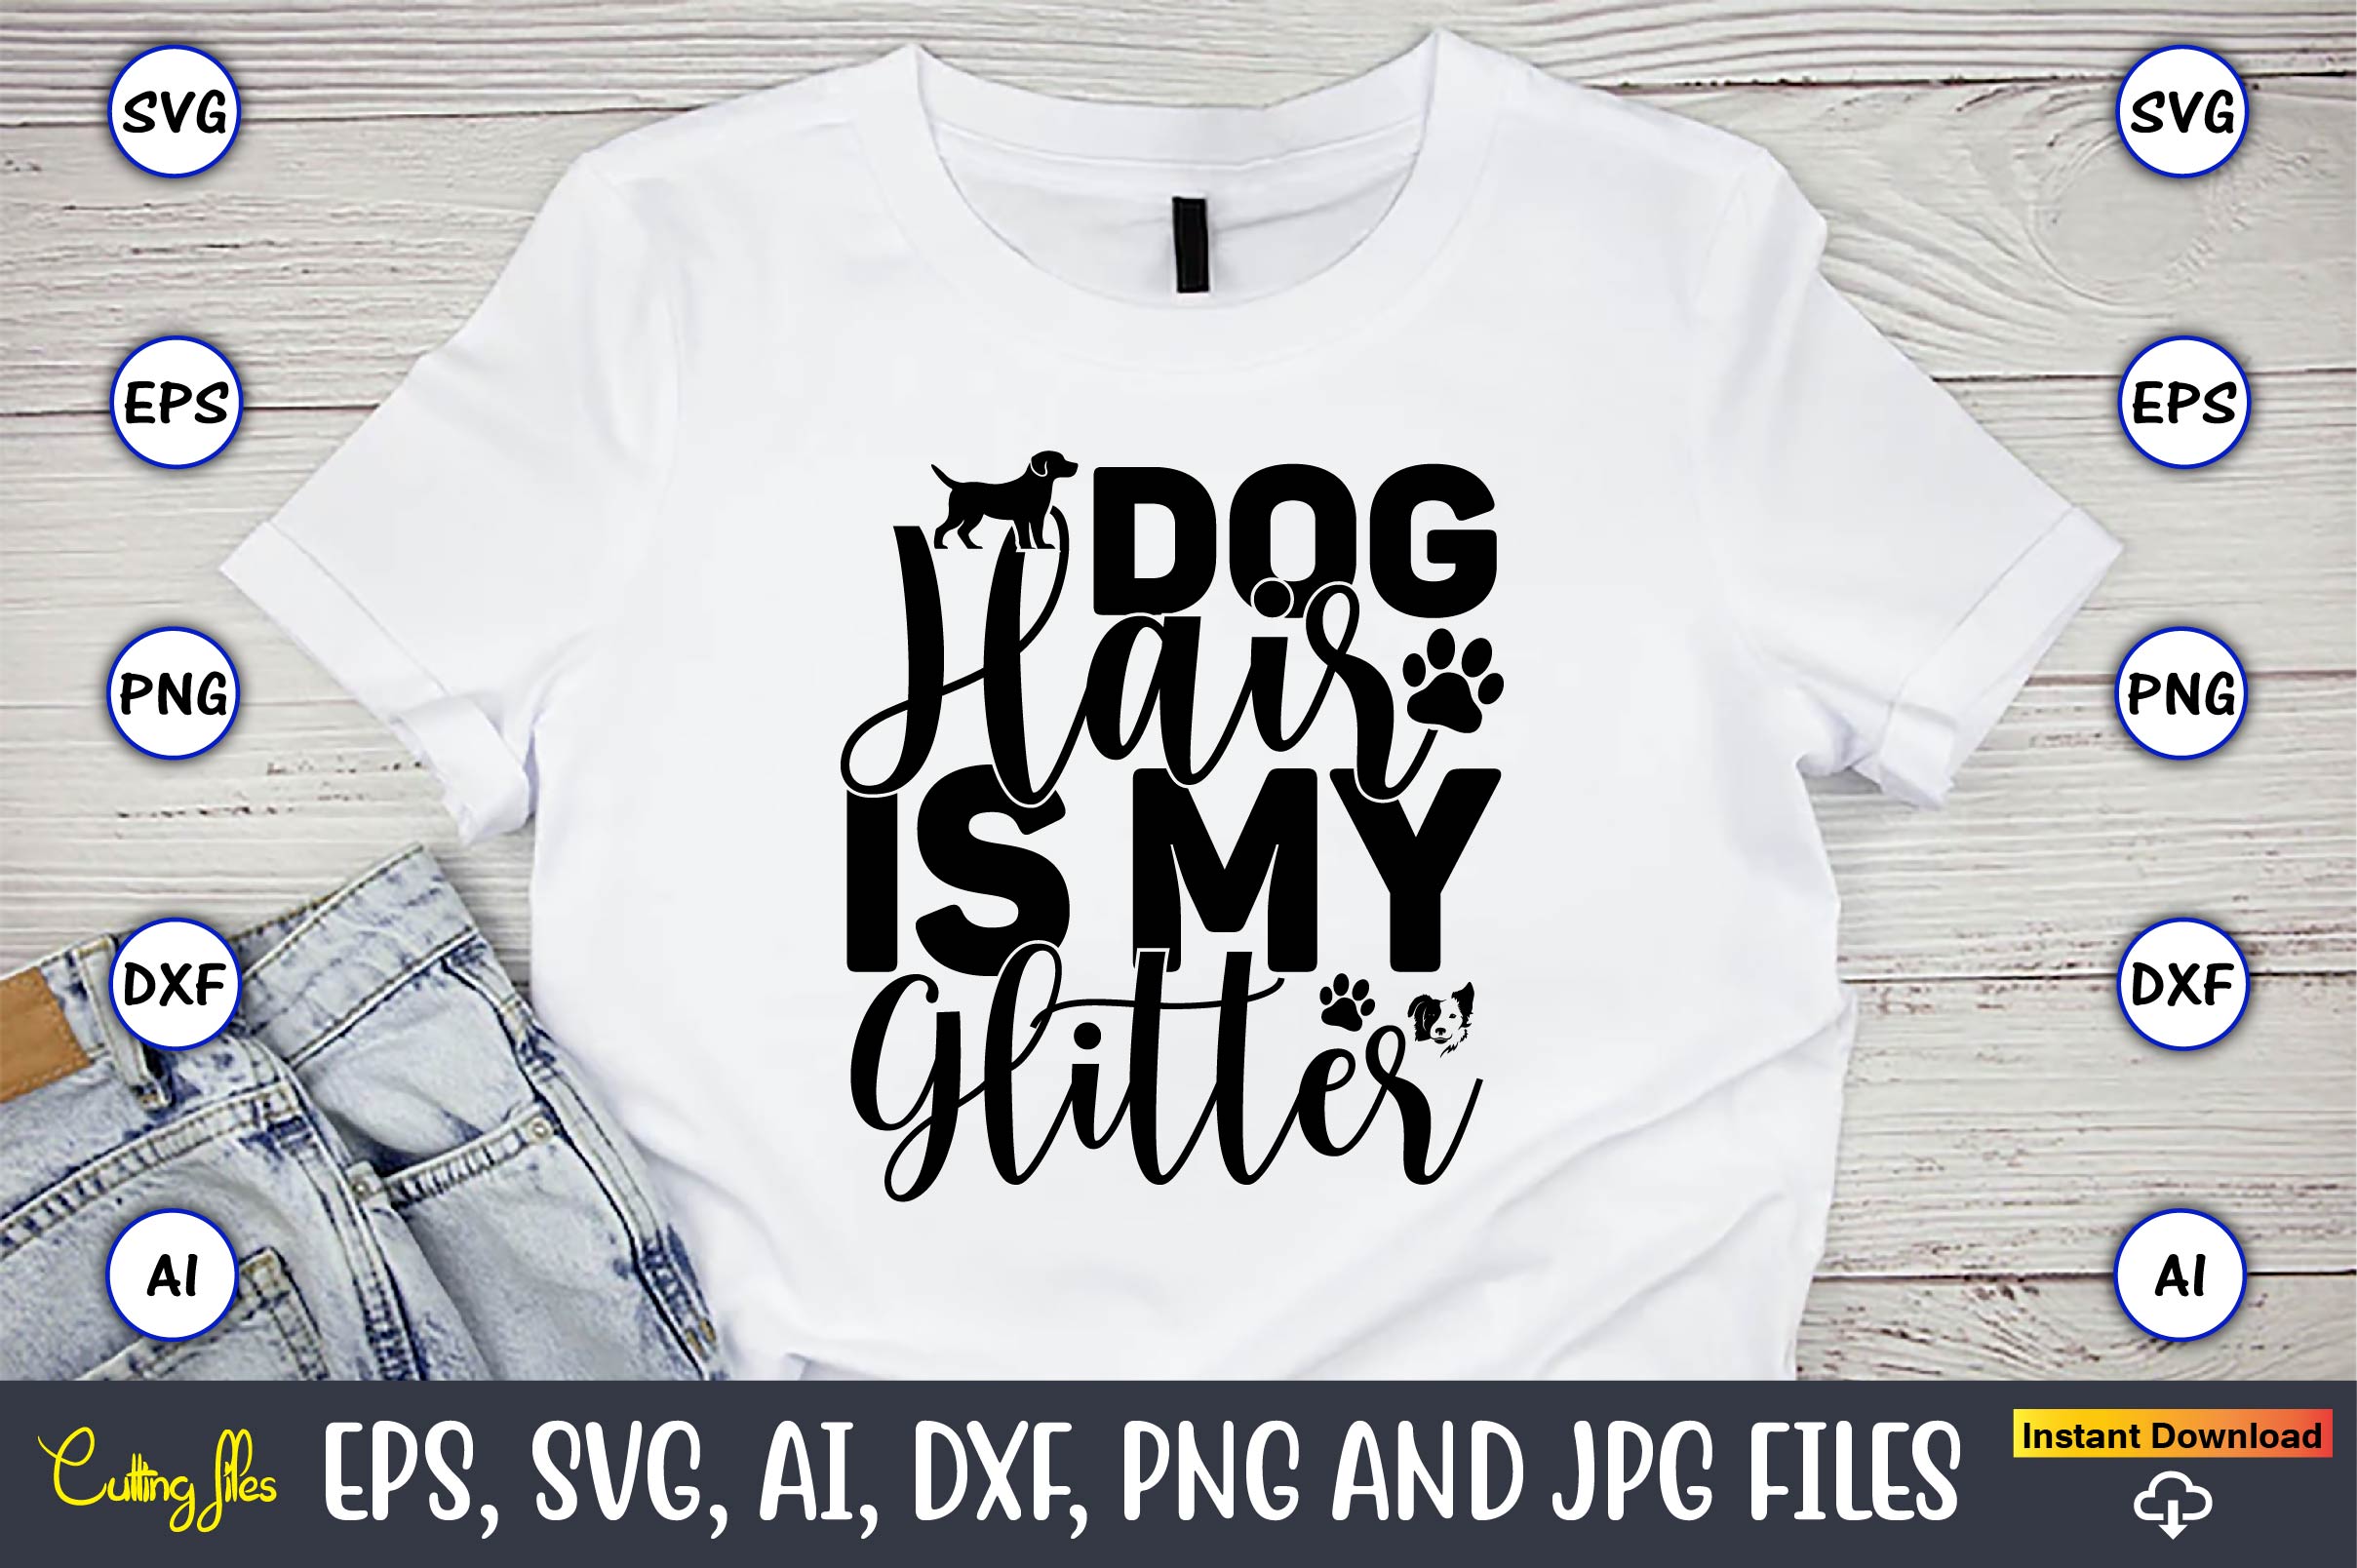 Image of a white T-shirt with a unique slogan Dog hair is my glitter.